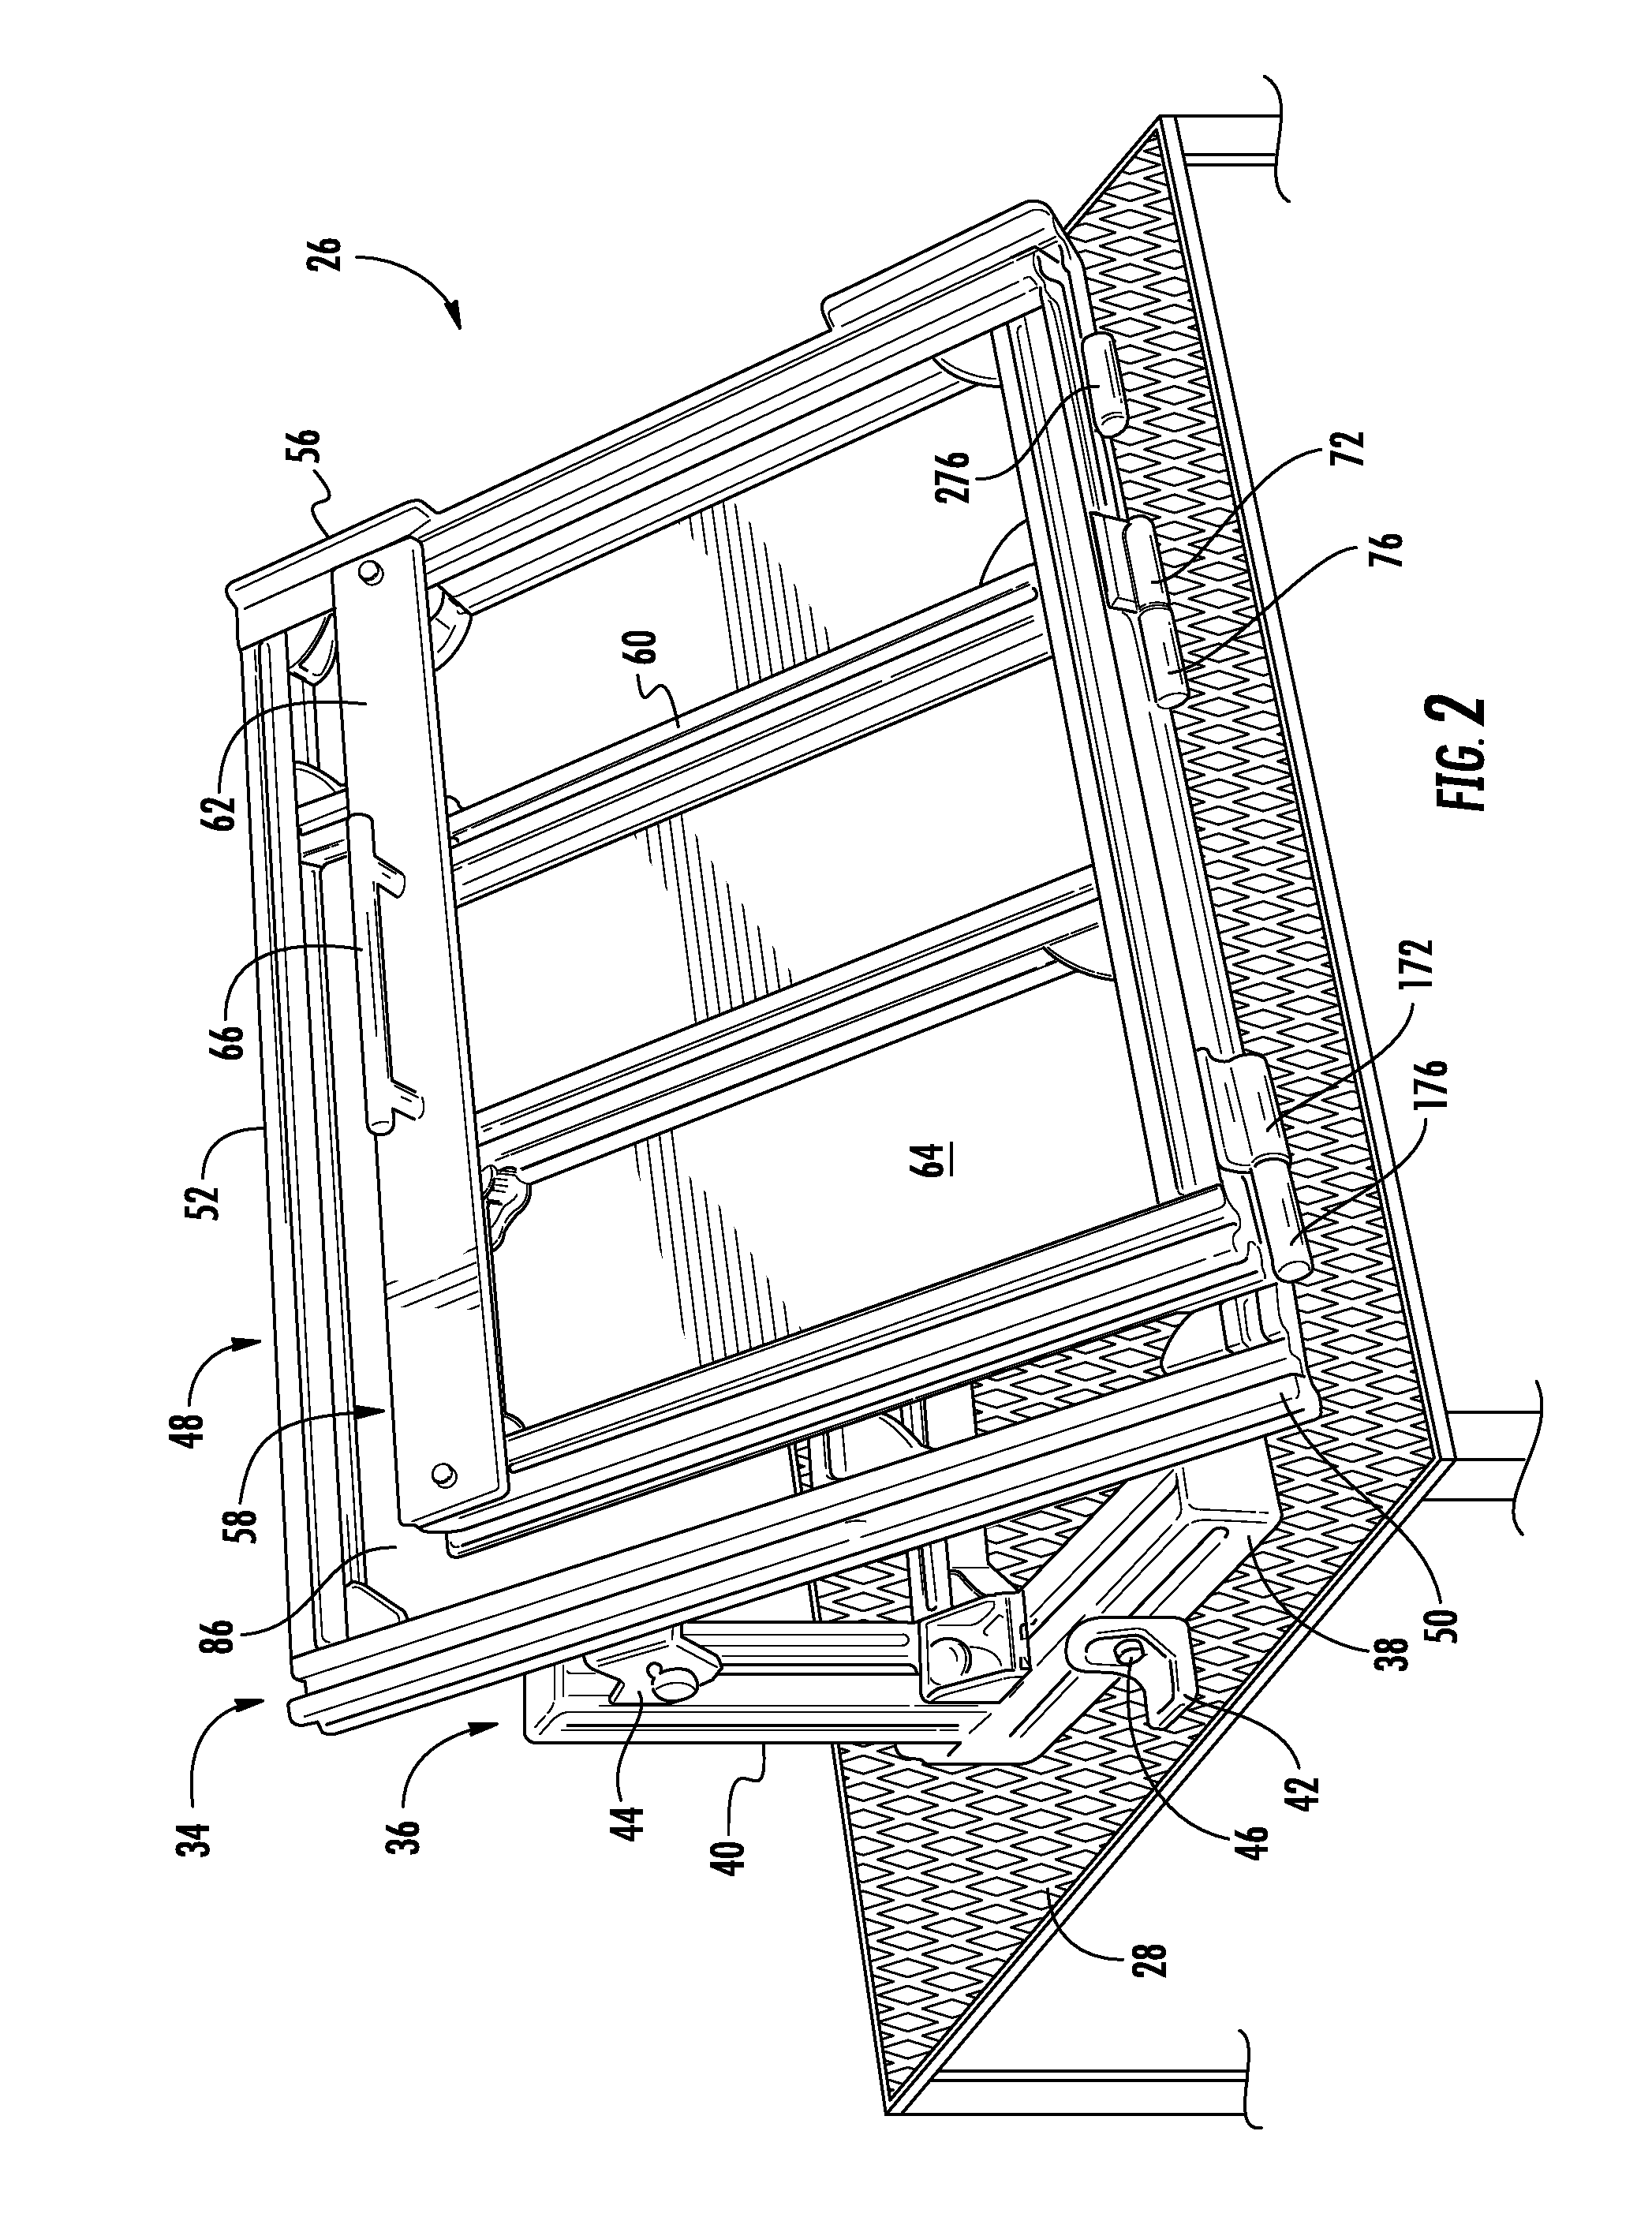 Home appliance with treated window and method for treating the window